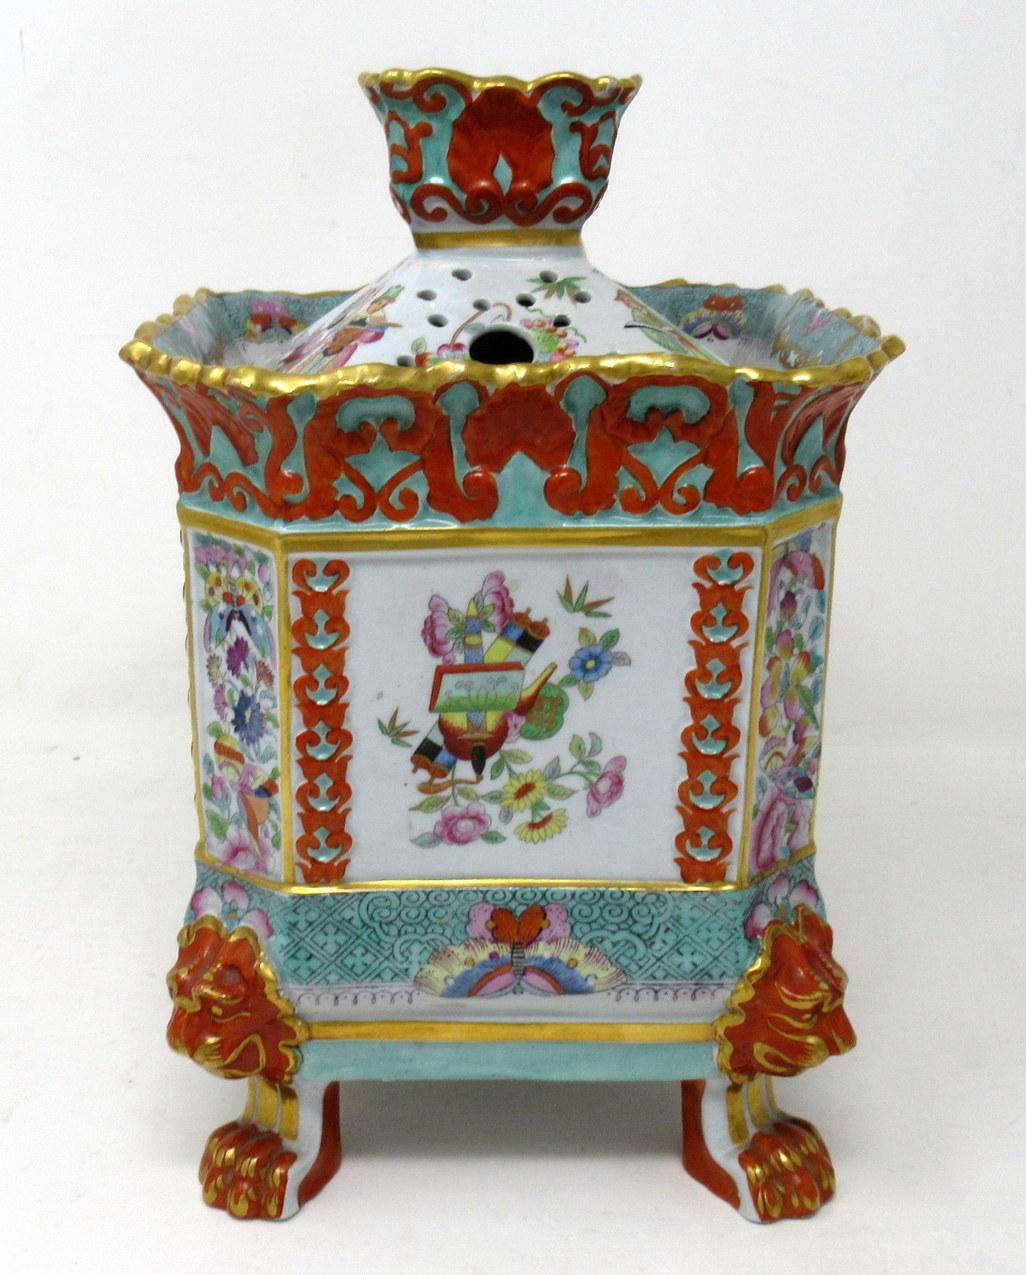 An exceptionally rare Davenport Bone China bulb pot or pot Pourri Centerpiece of museum quality, complete with its two original covers. Circa 1840. 

Each square panel richly hand painted in Chinoiserie style, each canted side panel with still life